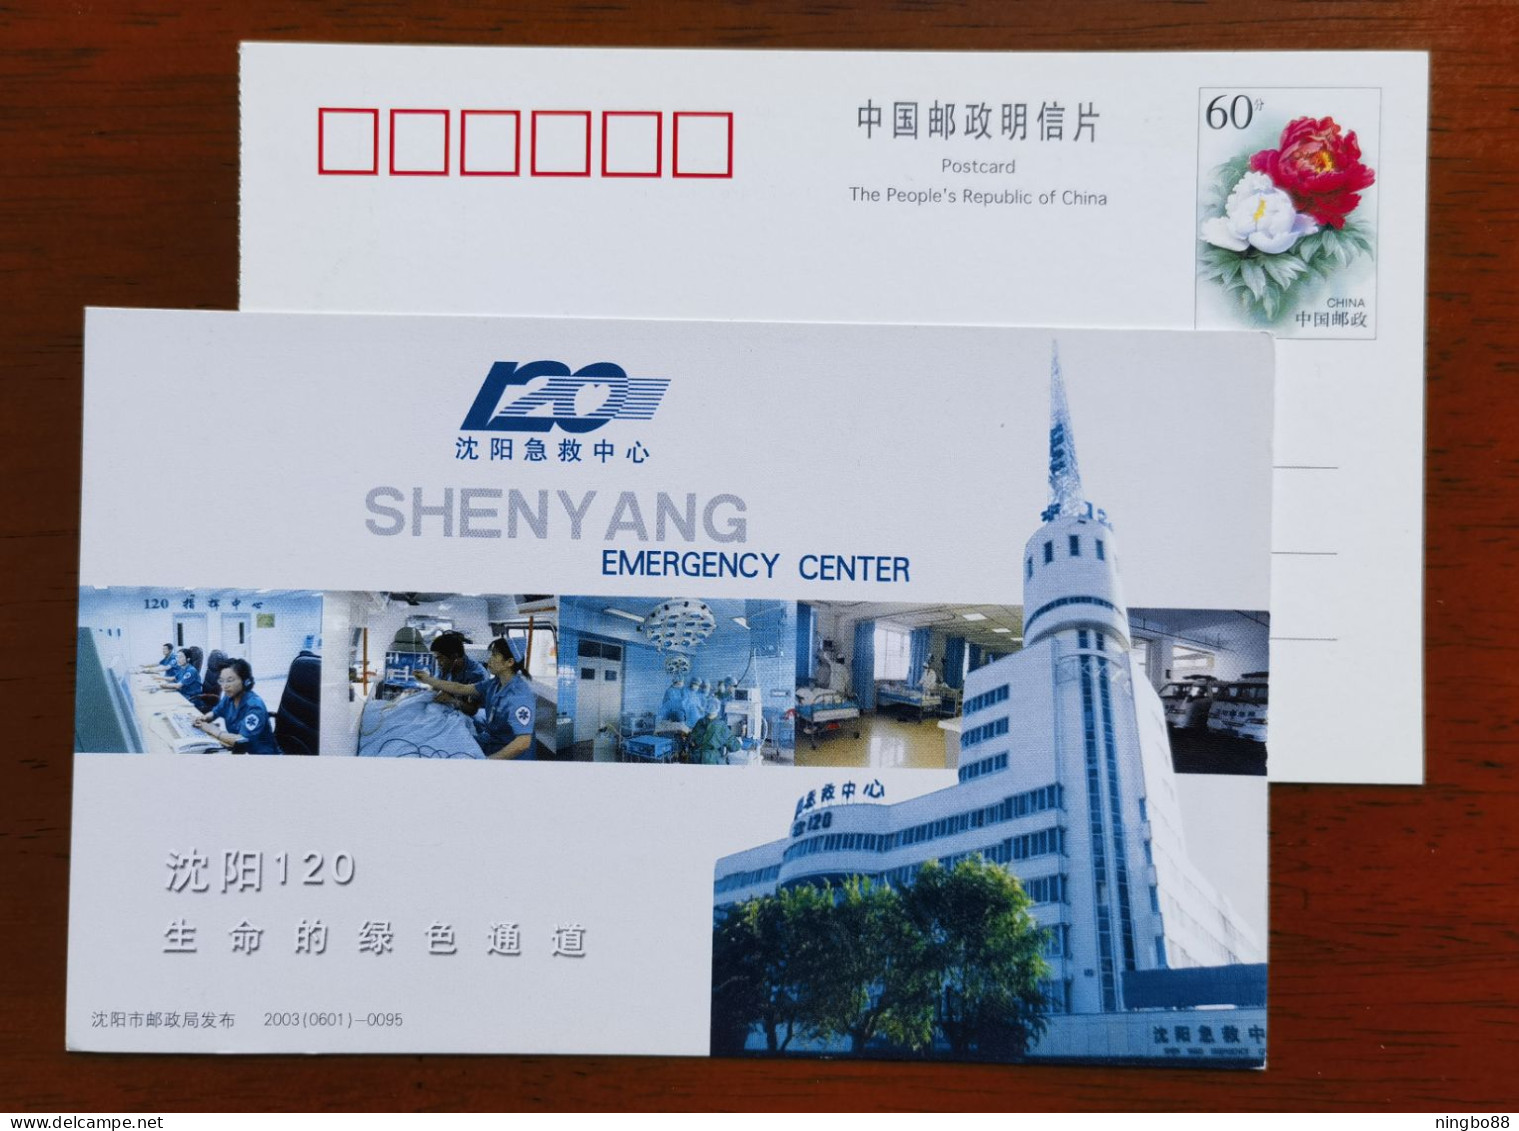 120 The Green Channel Of Life,Command Center,ambulance,China 2003 Shenyang Emergency Center Advertising Pre-stamped Card - Secourisme